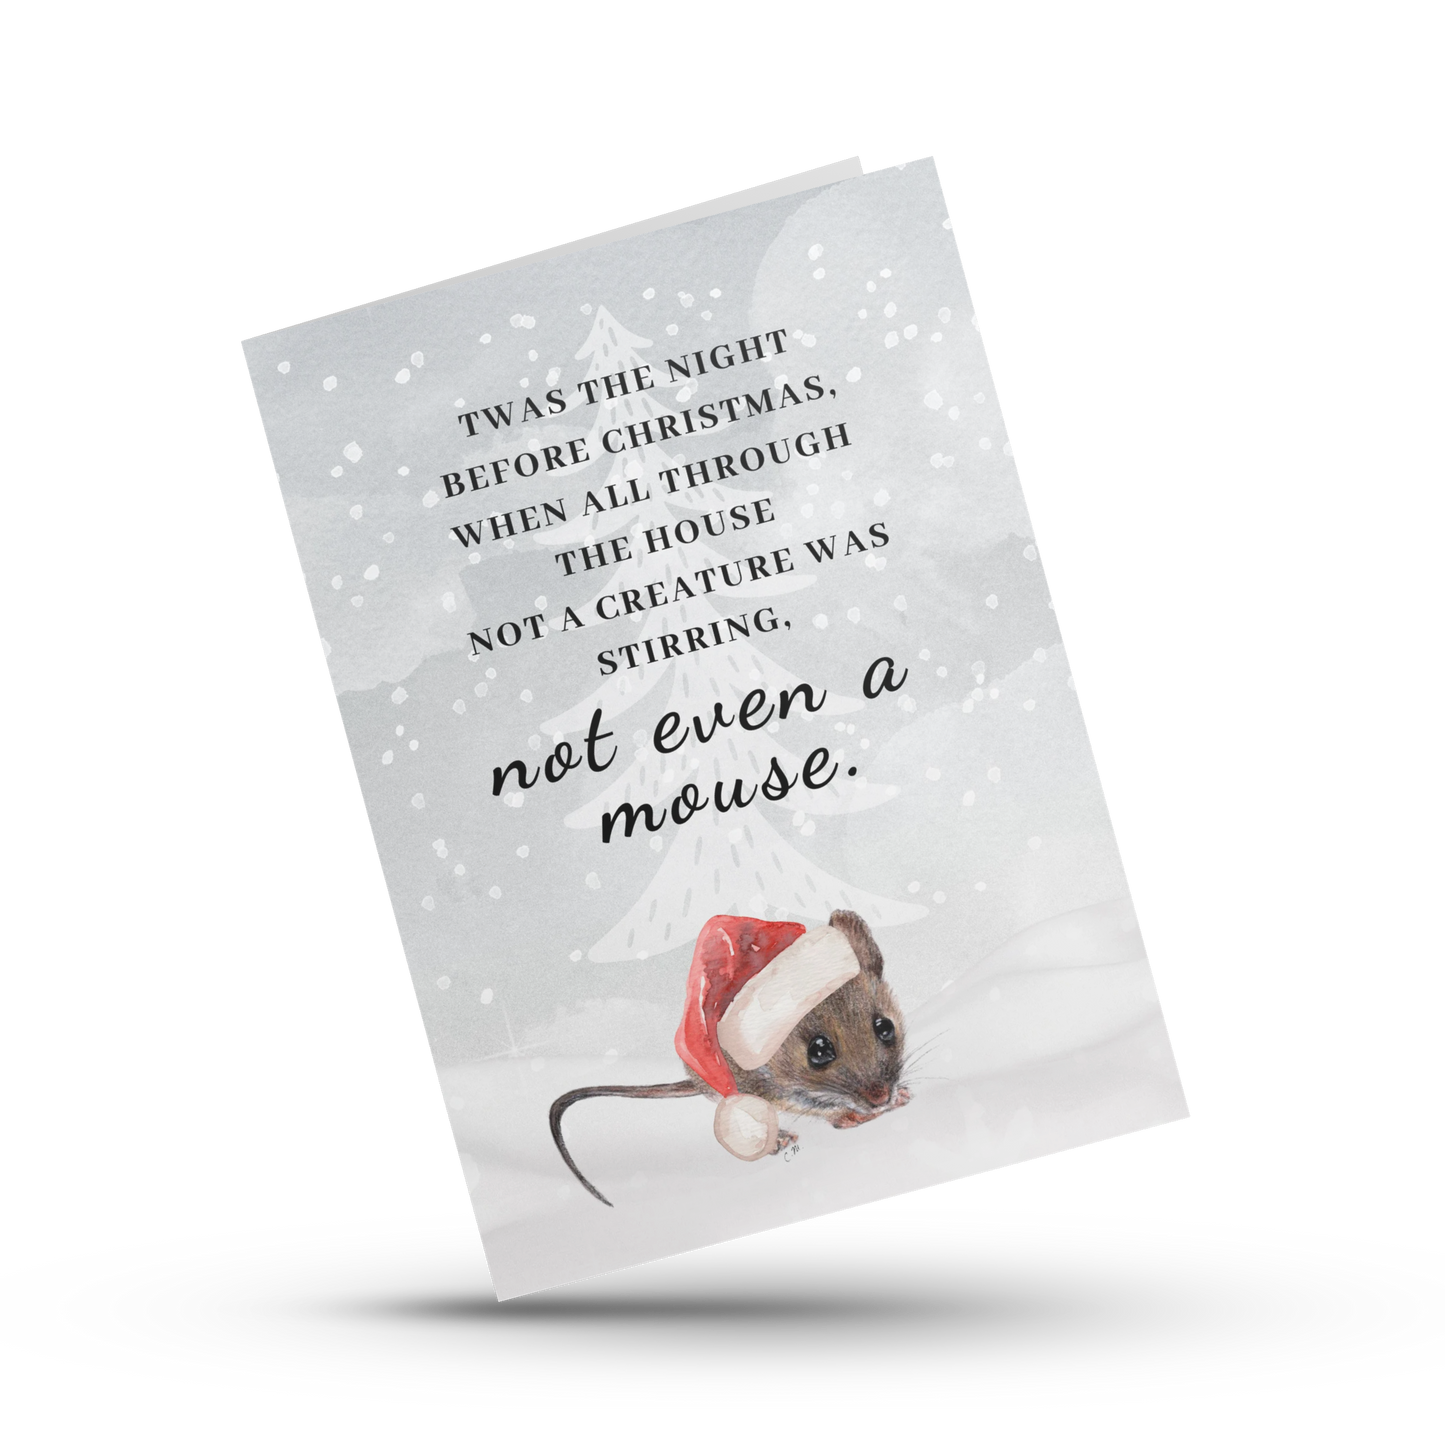 Mouse Christmas card, Twas the night before Christmas, Not a creature was stirring, Santa mouse card, Cute mouse holiday card, Festive mouse